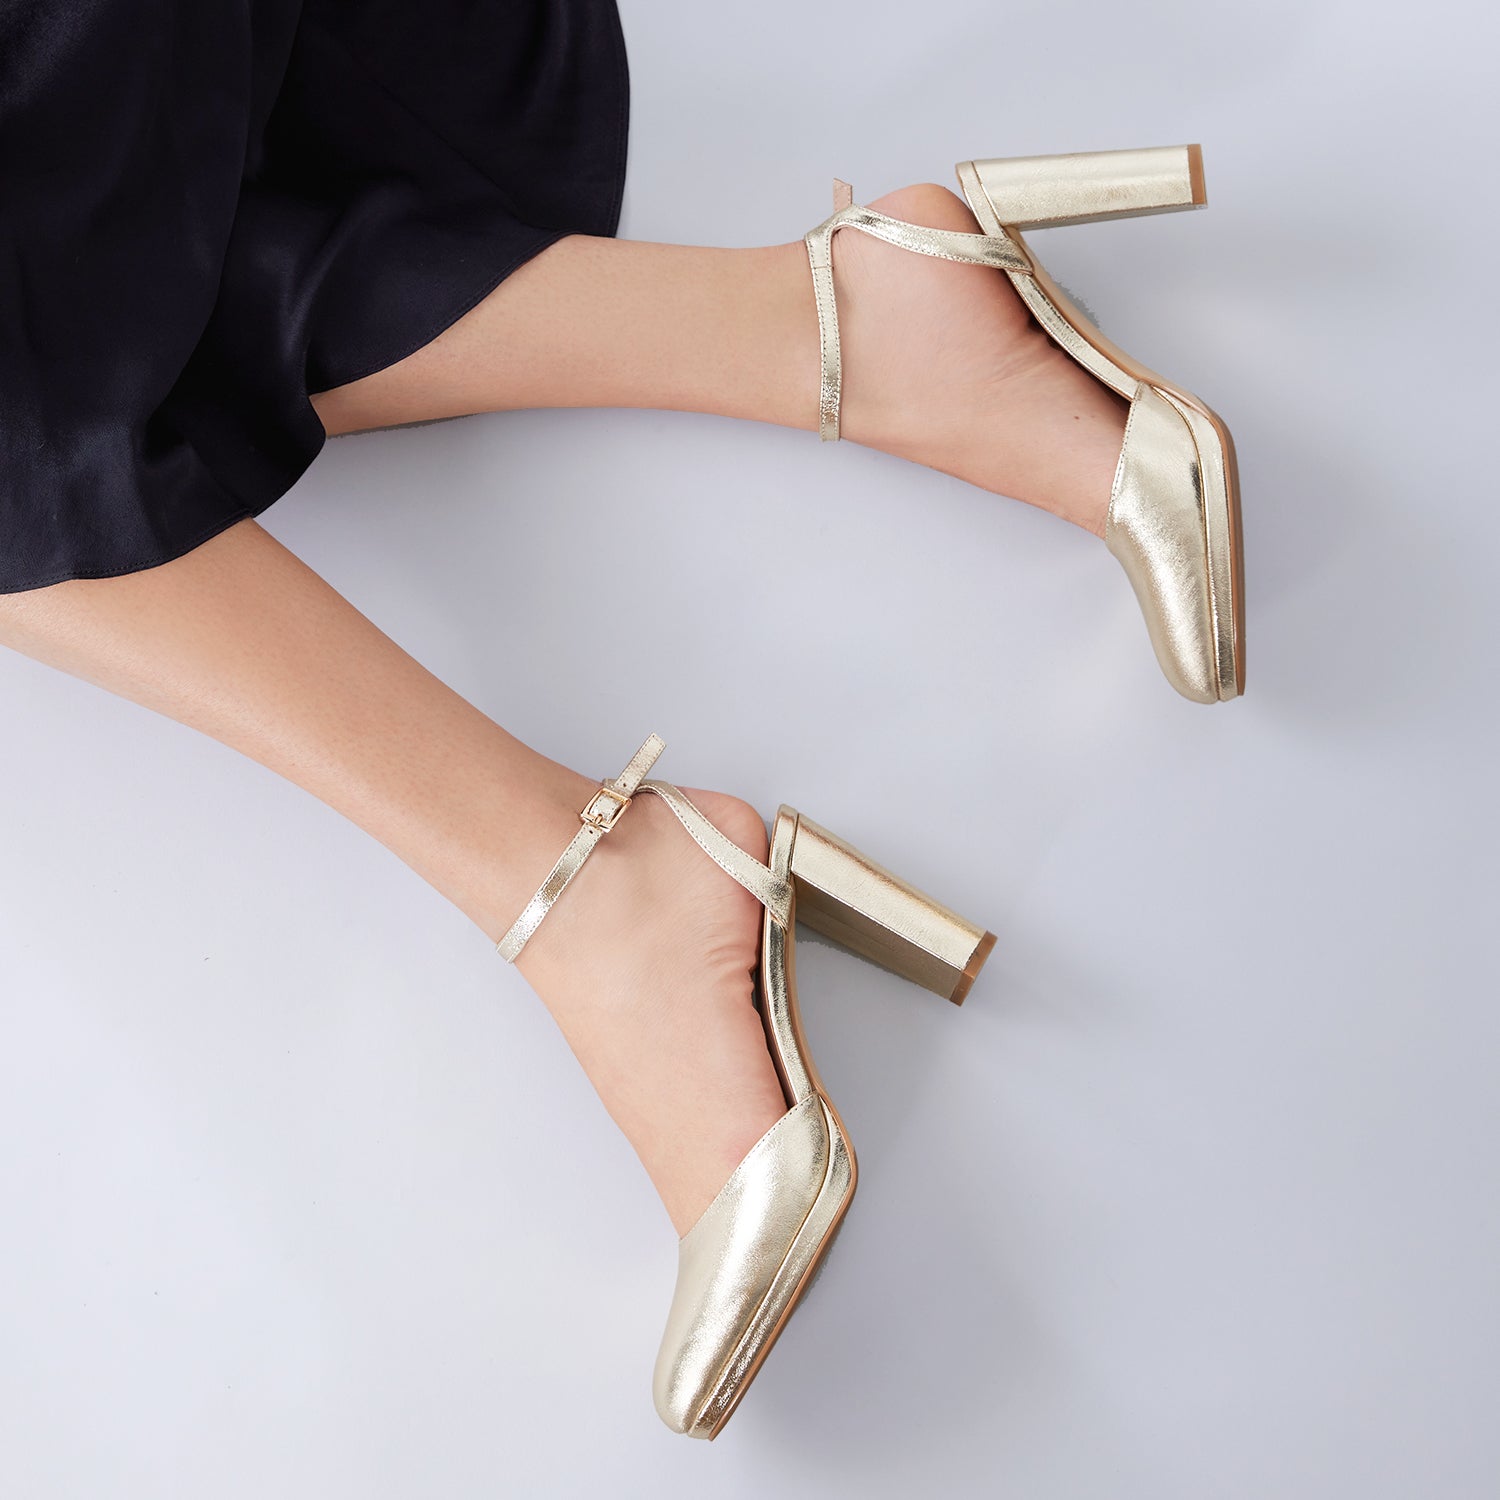 Blakely Platform Heel 95mm | Muted gold leather